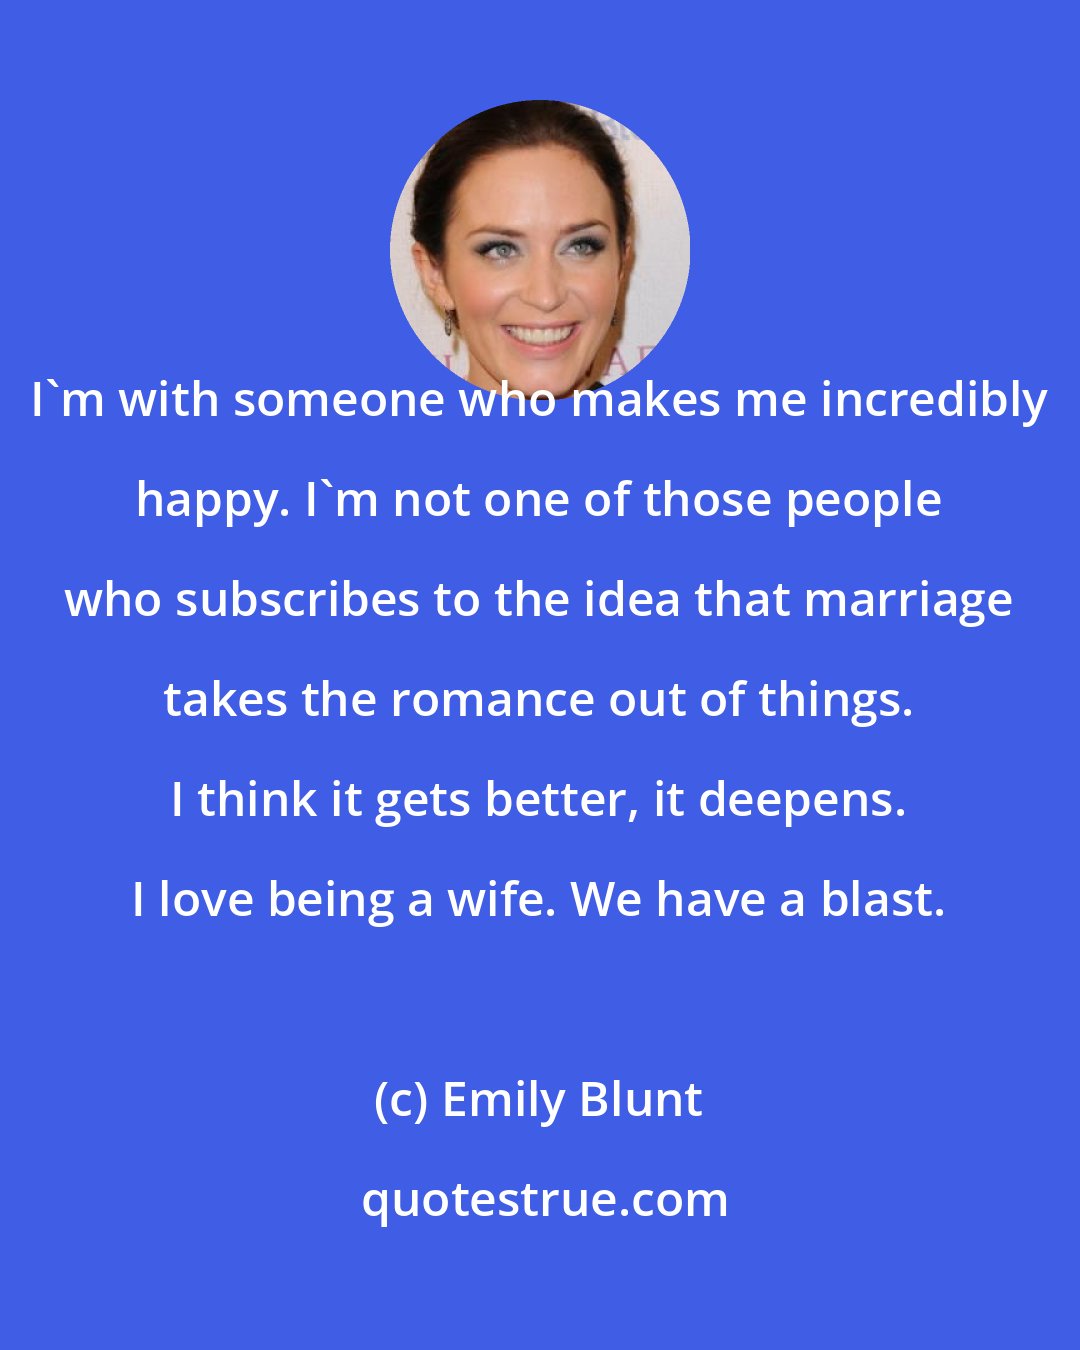 Emily Blunt: I'm with someone who makes me incredibly happy. I'm not one of those people who subscribes to the idea that marriage takes the romance out of things. I think it gets better, it deepens. I love being a wife. We have a blast.